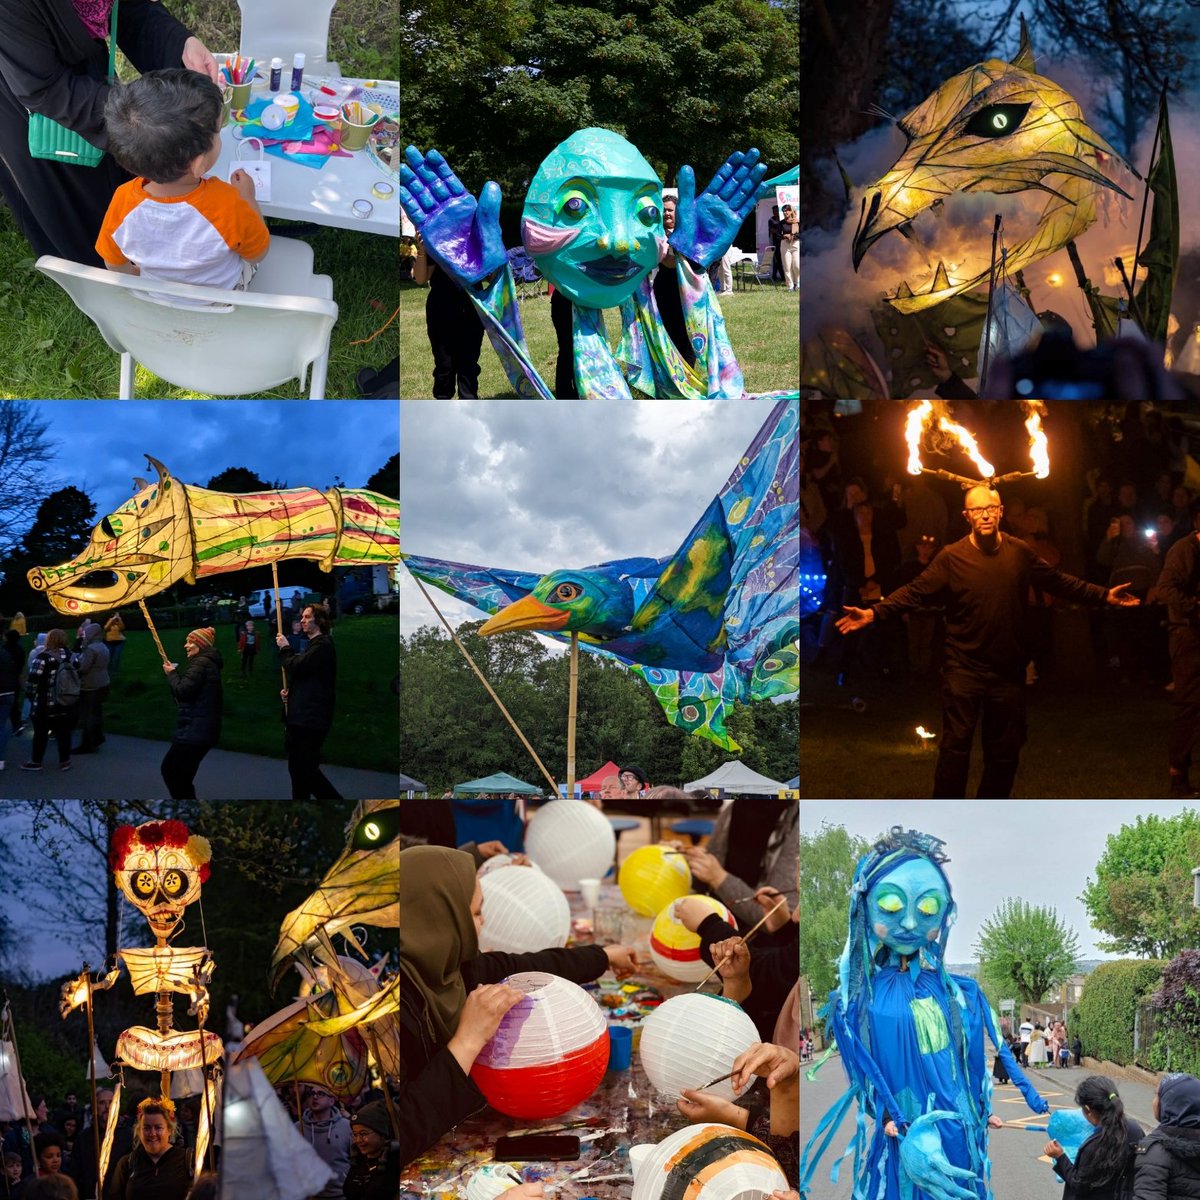 Some of the things we've recently been up to...#outdoorarts @BDCulture_ @BetterStartBfd @BfdForEveryone @SaltaireFest @bradford2025 @BradfordLitFest @CODSWALLOPcic @BradfordTrident